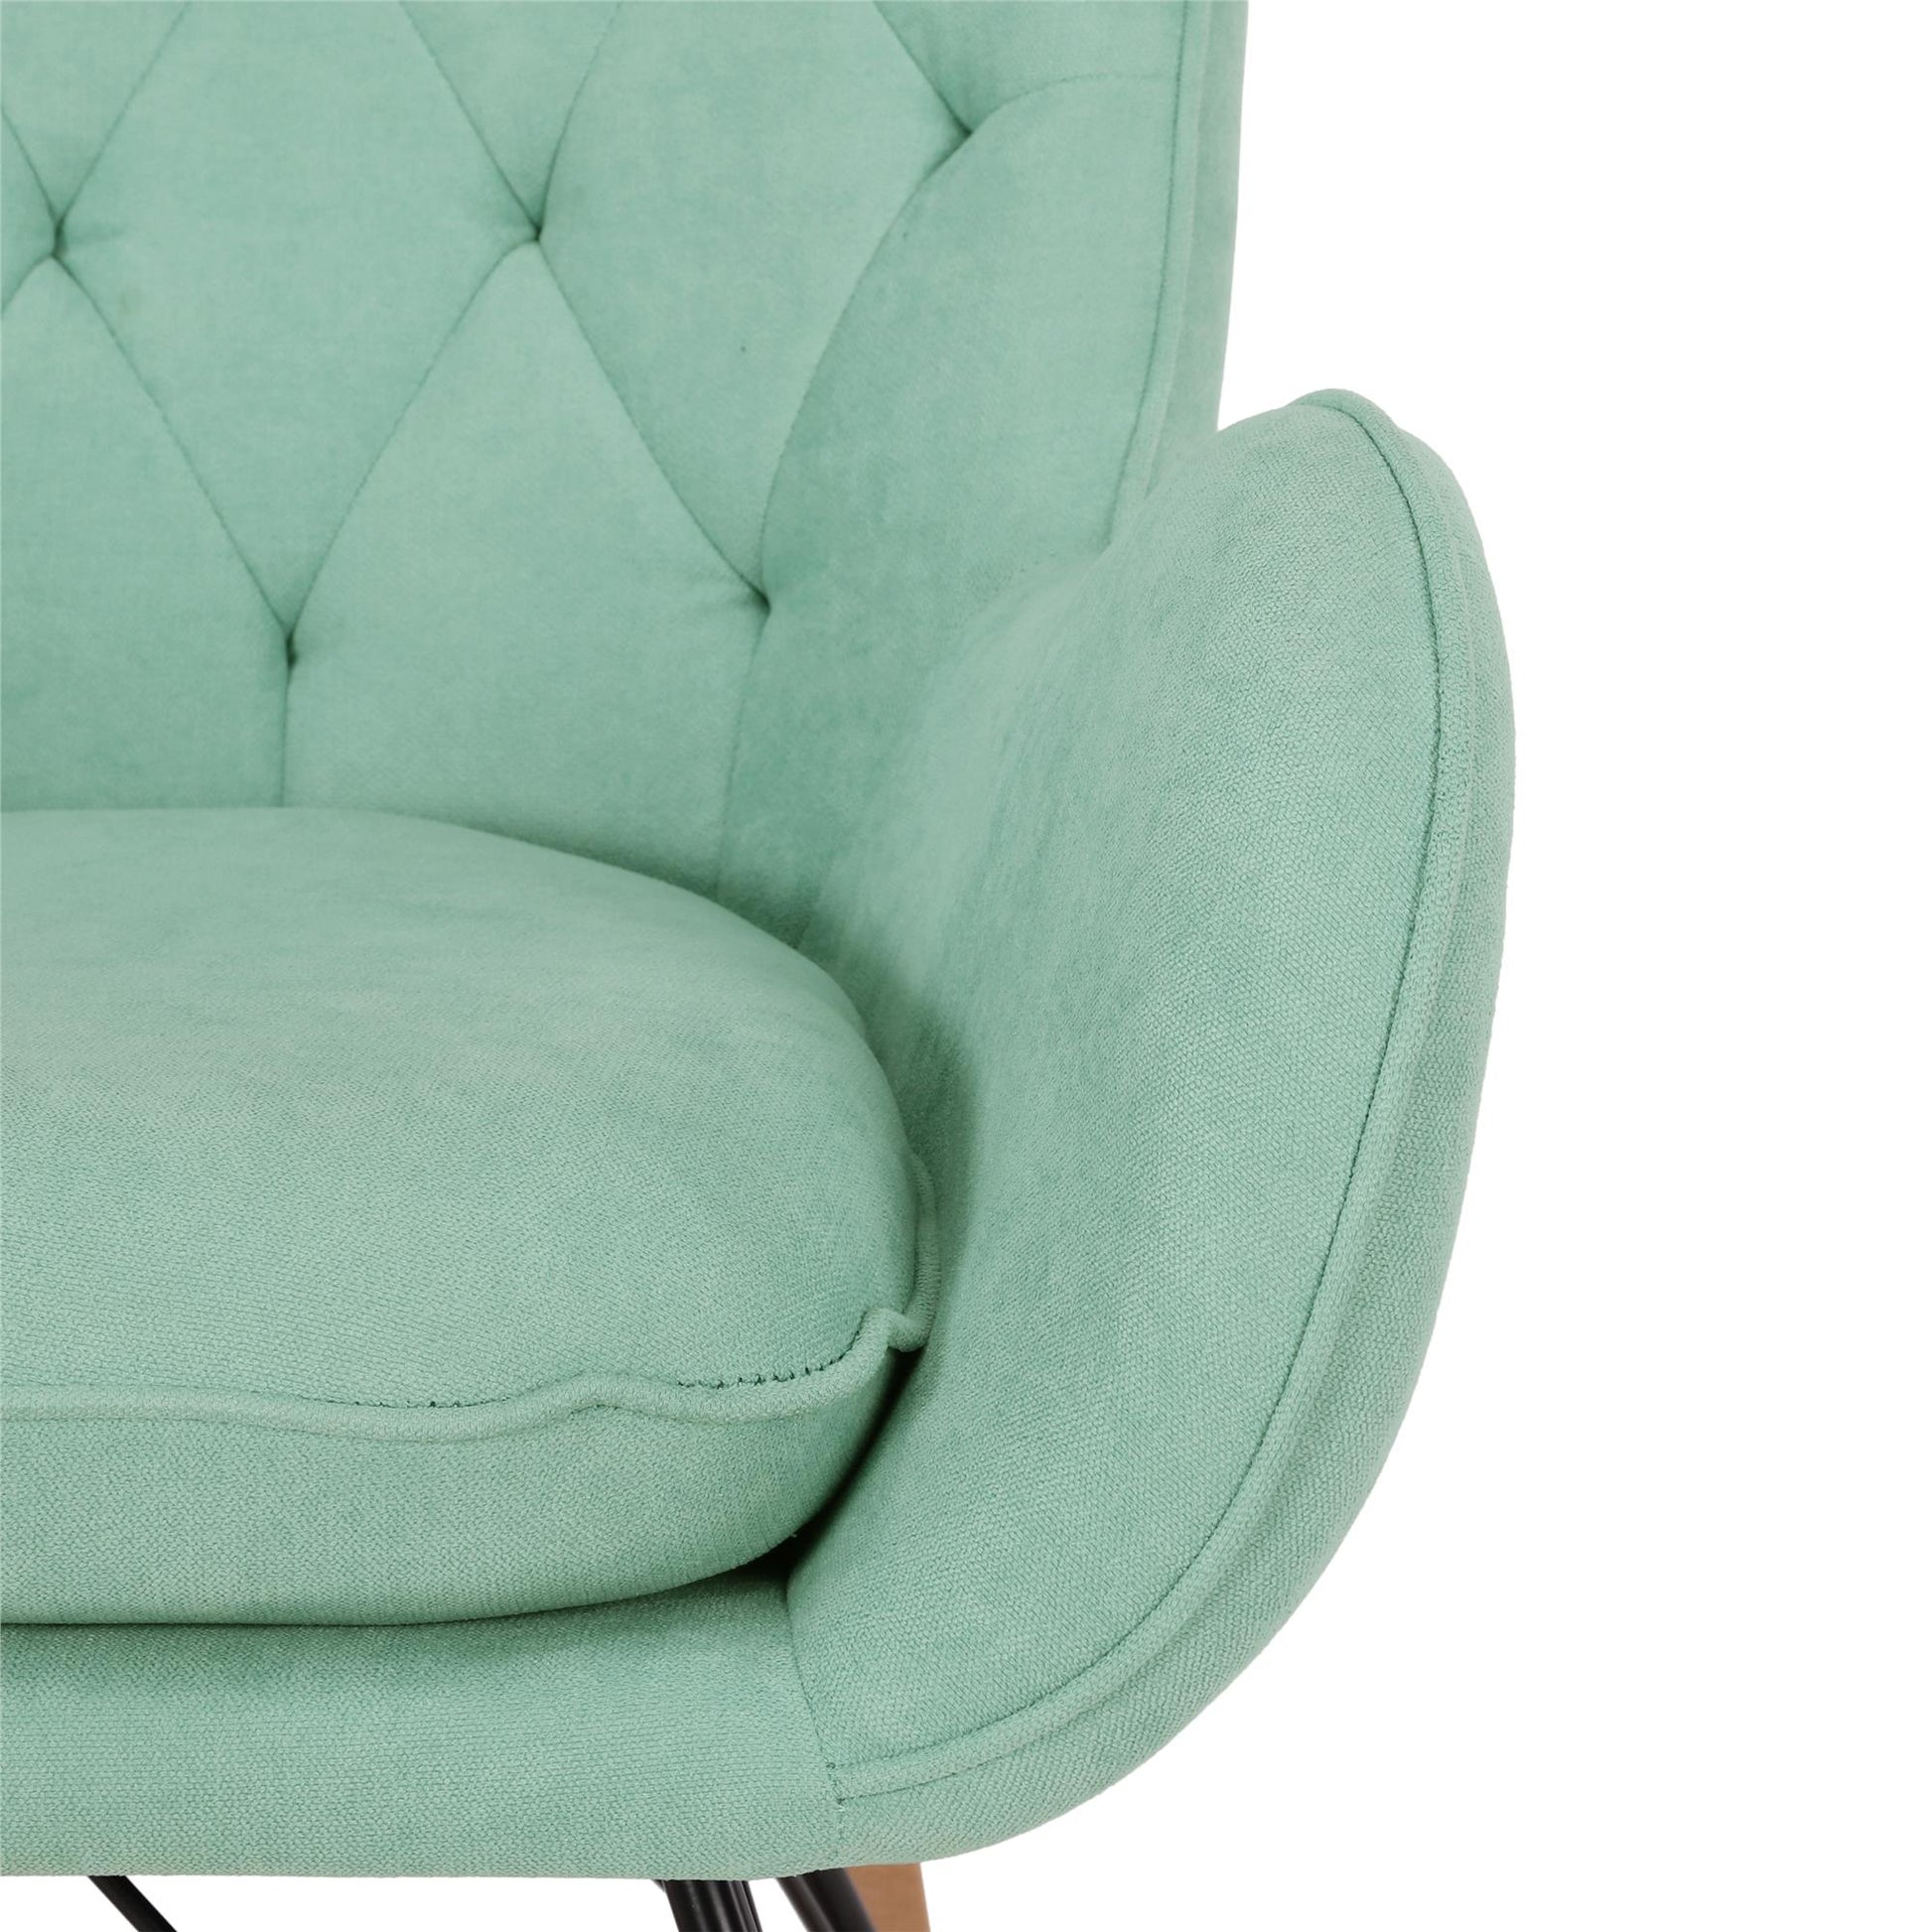 Noah Rocking Chair with Side Storage Pockets and a Diamond Tufted Backrest - Teal